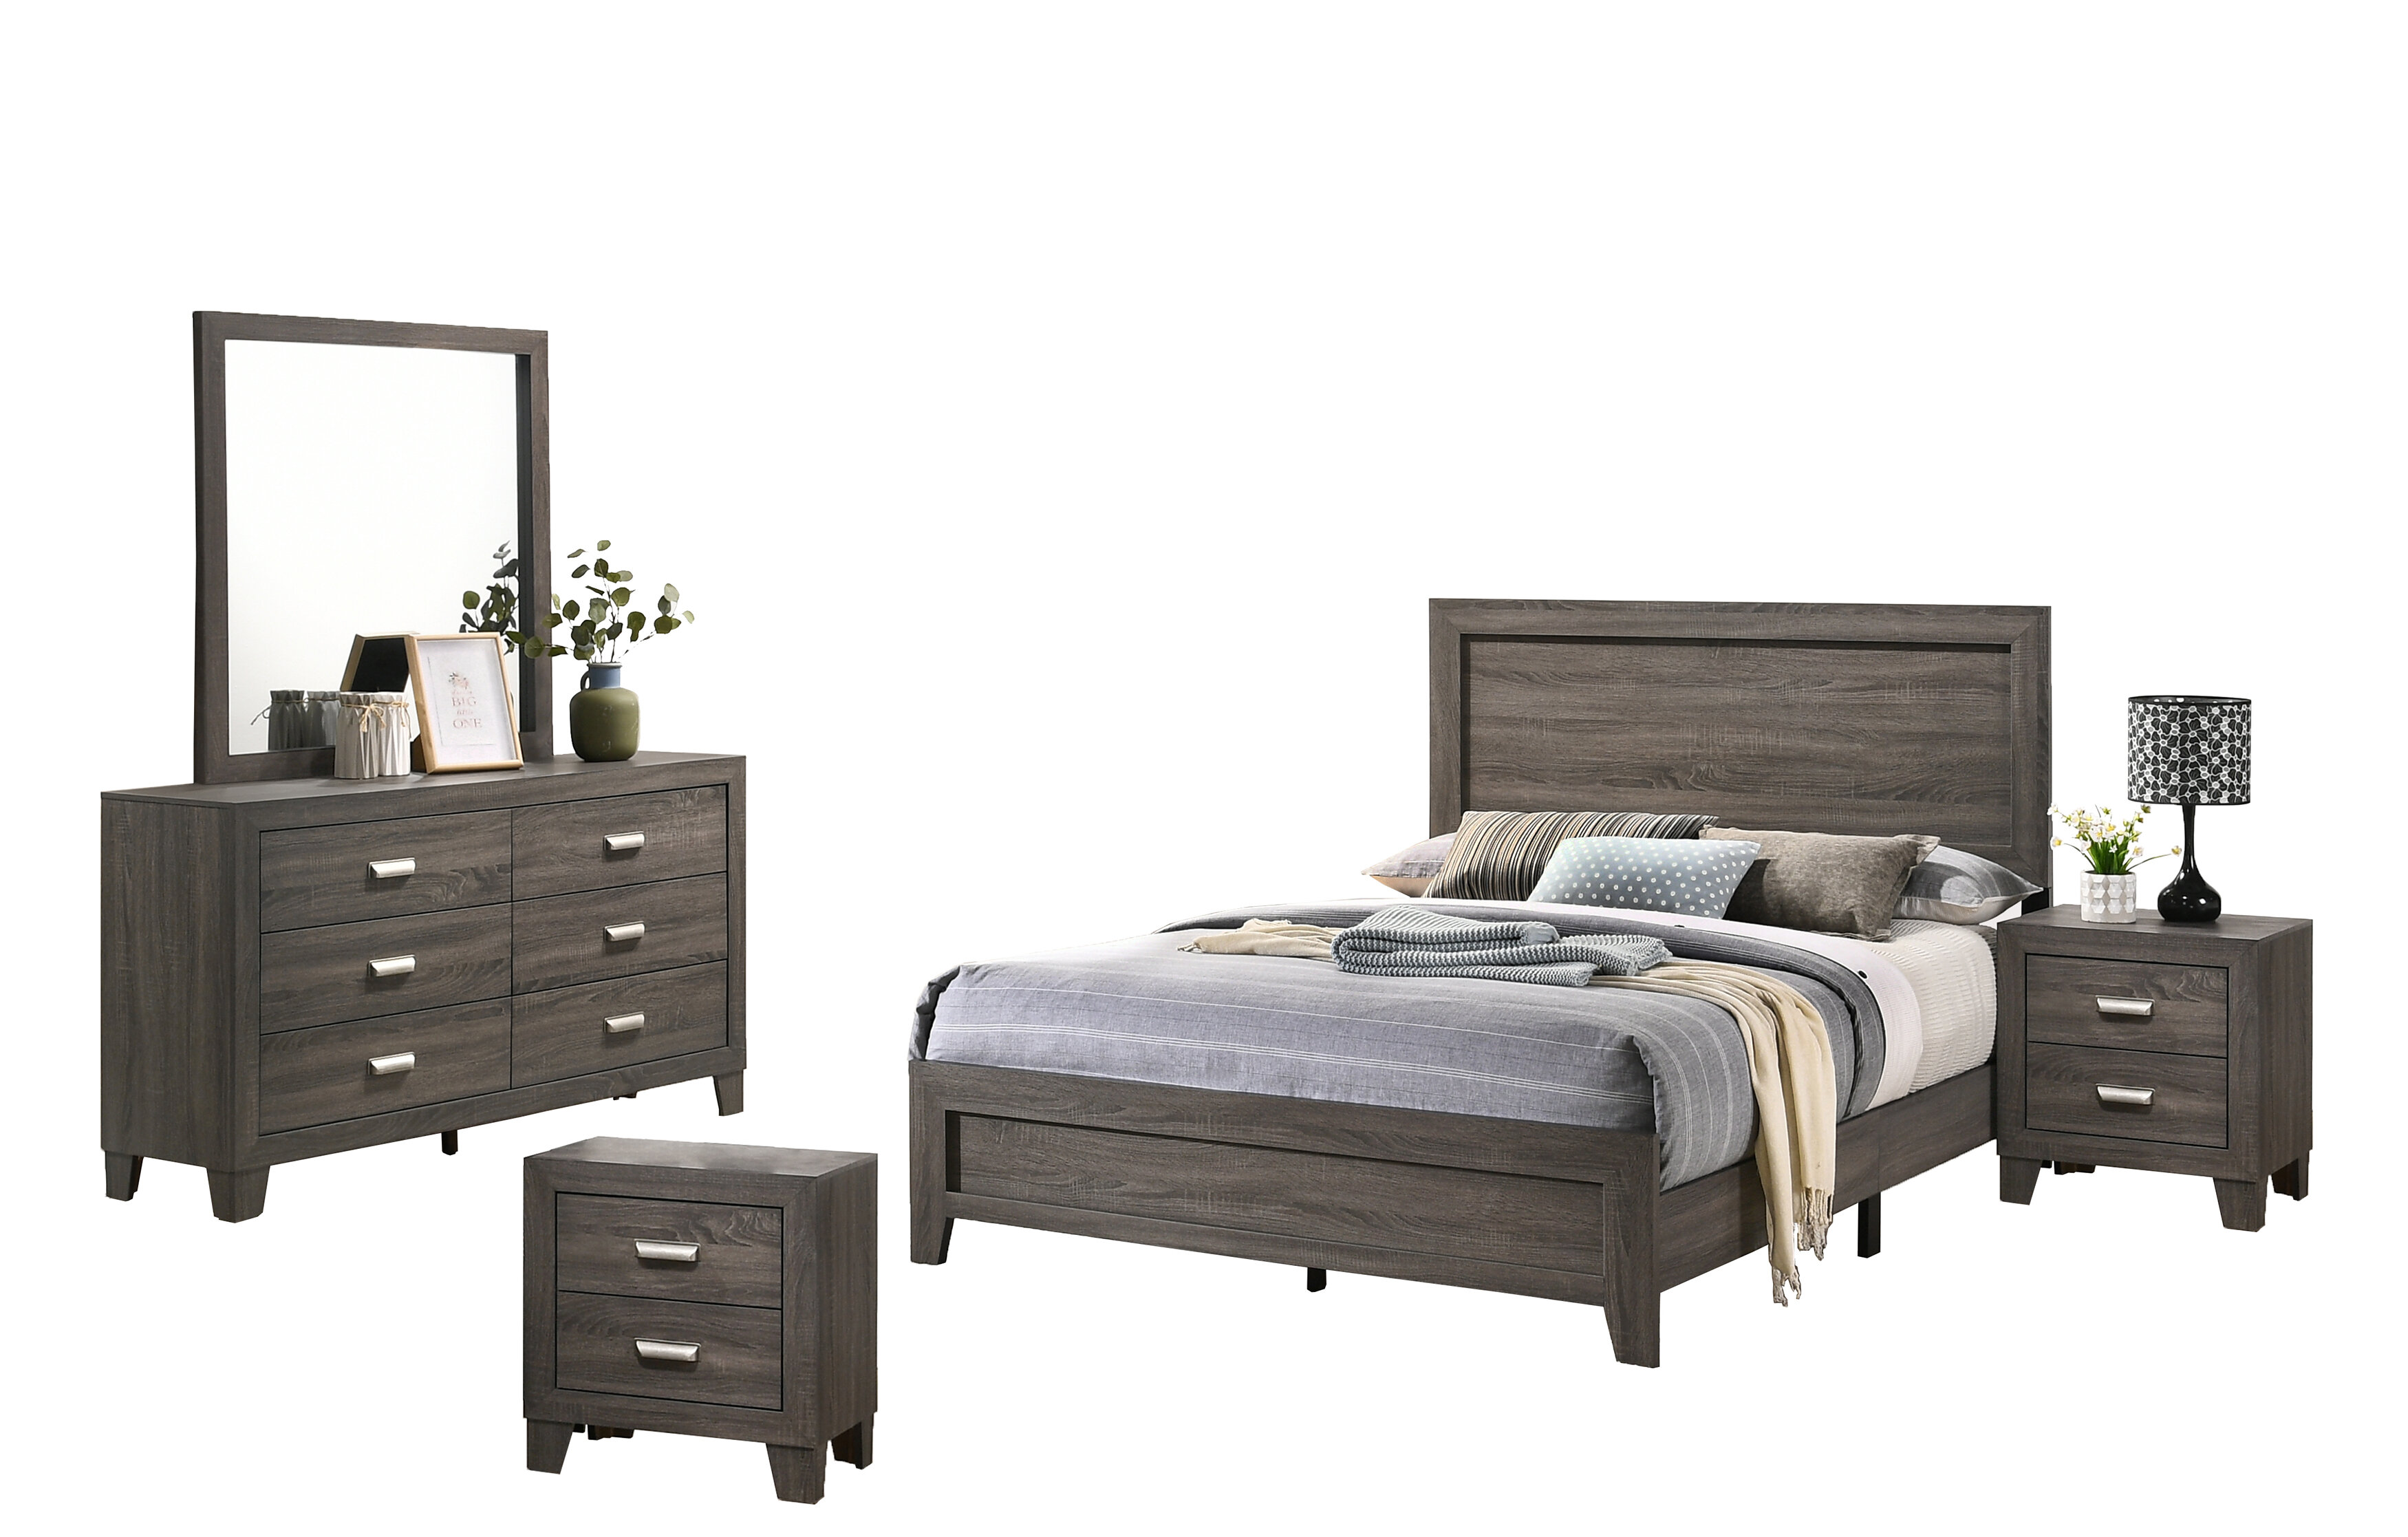 California King Modern Contemporary Bedroom Sets You Ll Love In 2021 Wayfair